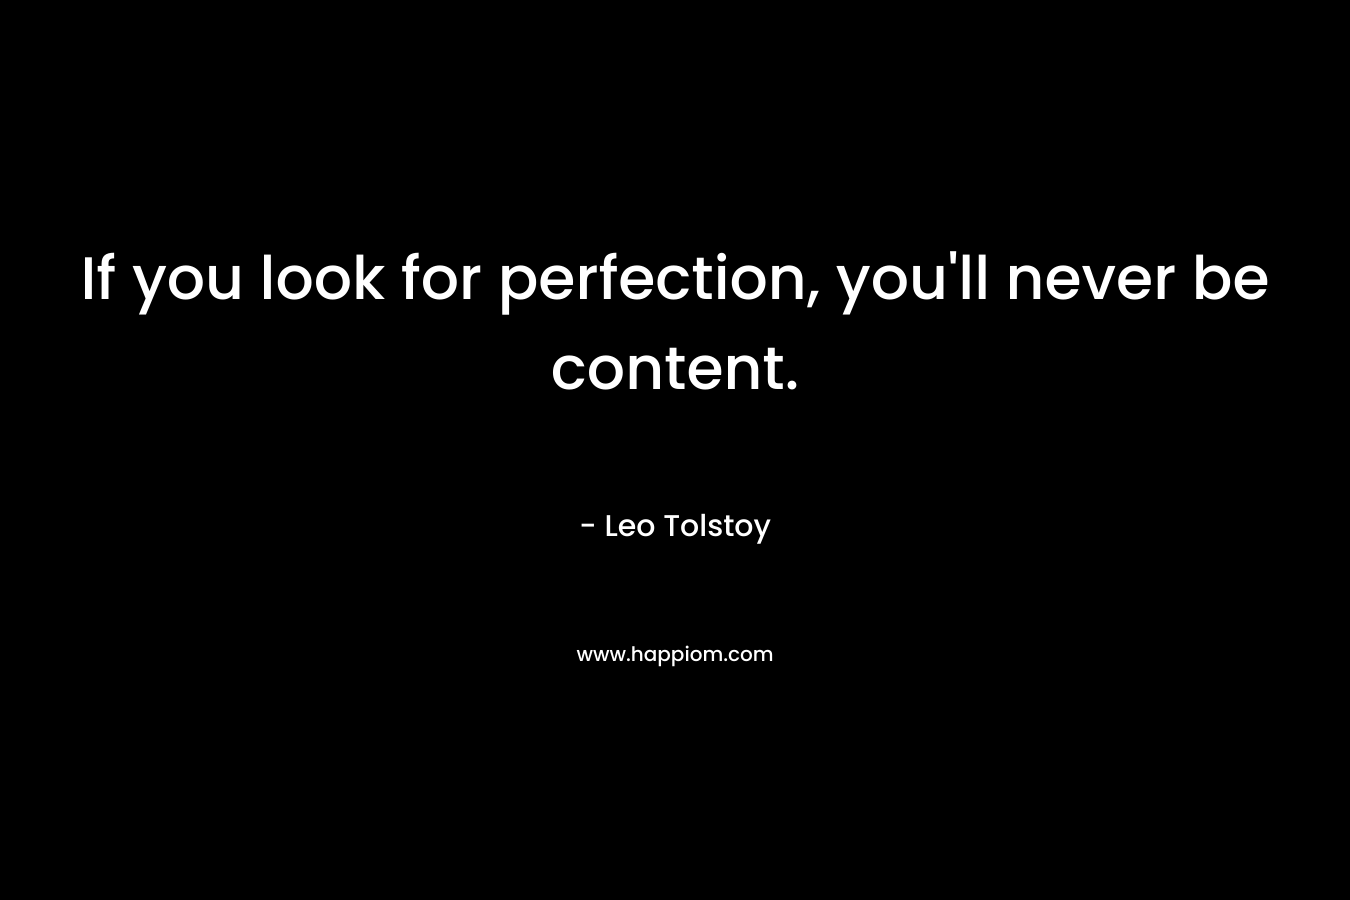 If you look for perfection, you’ll never be content. – Leo Tolstoy